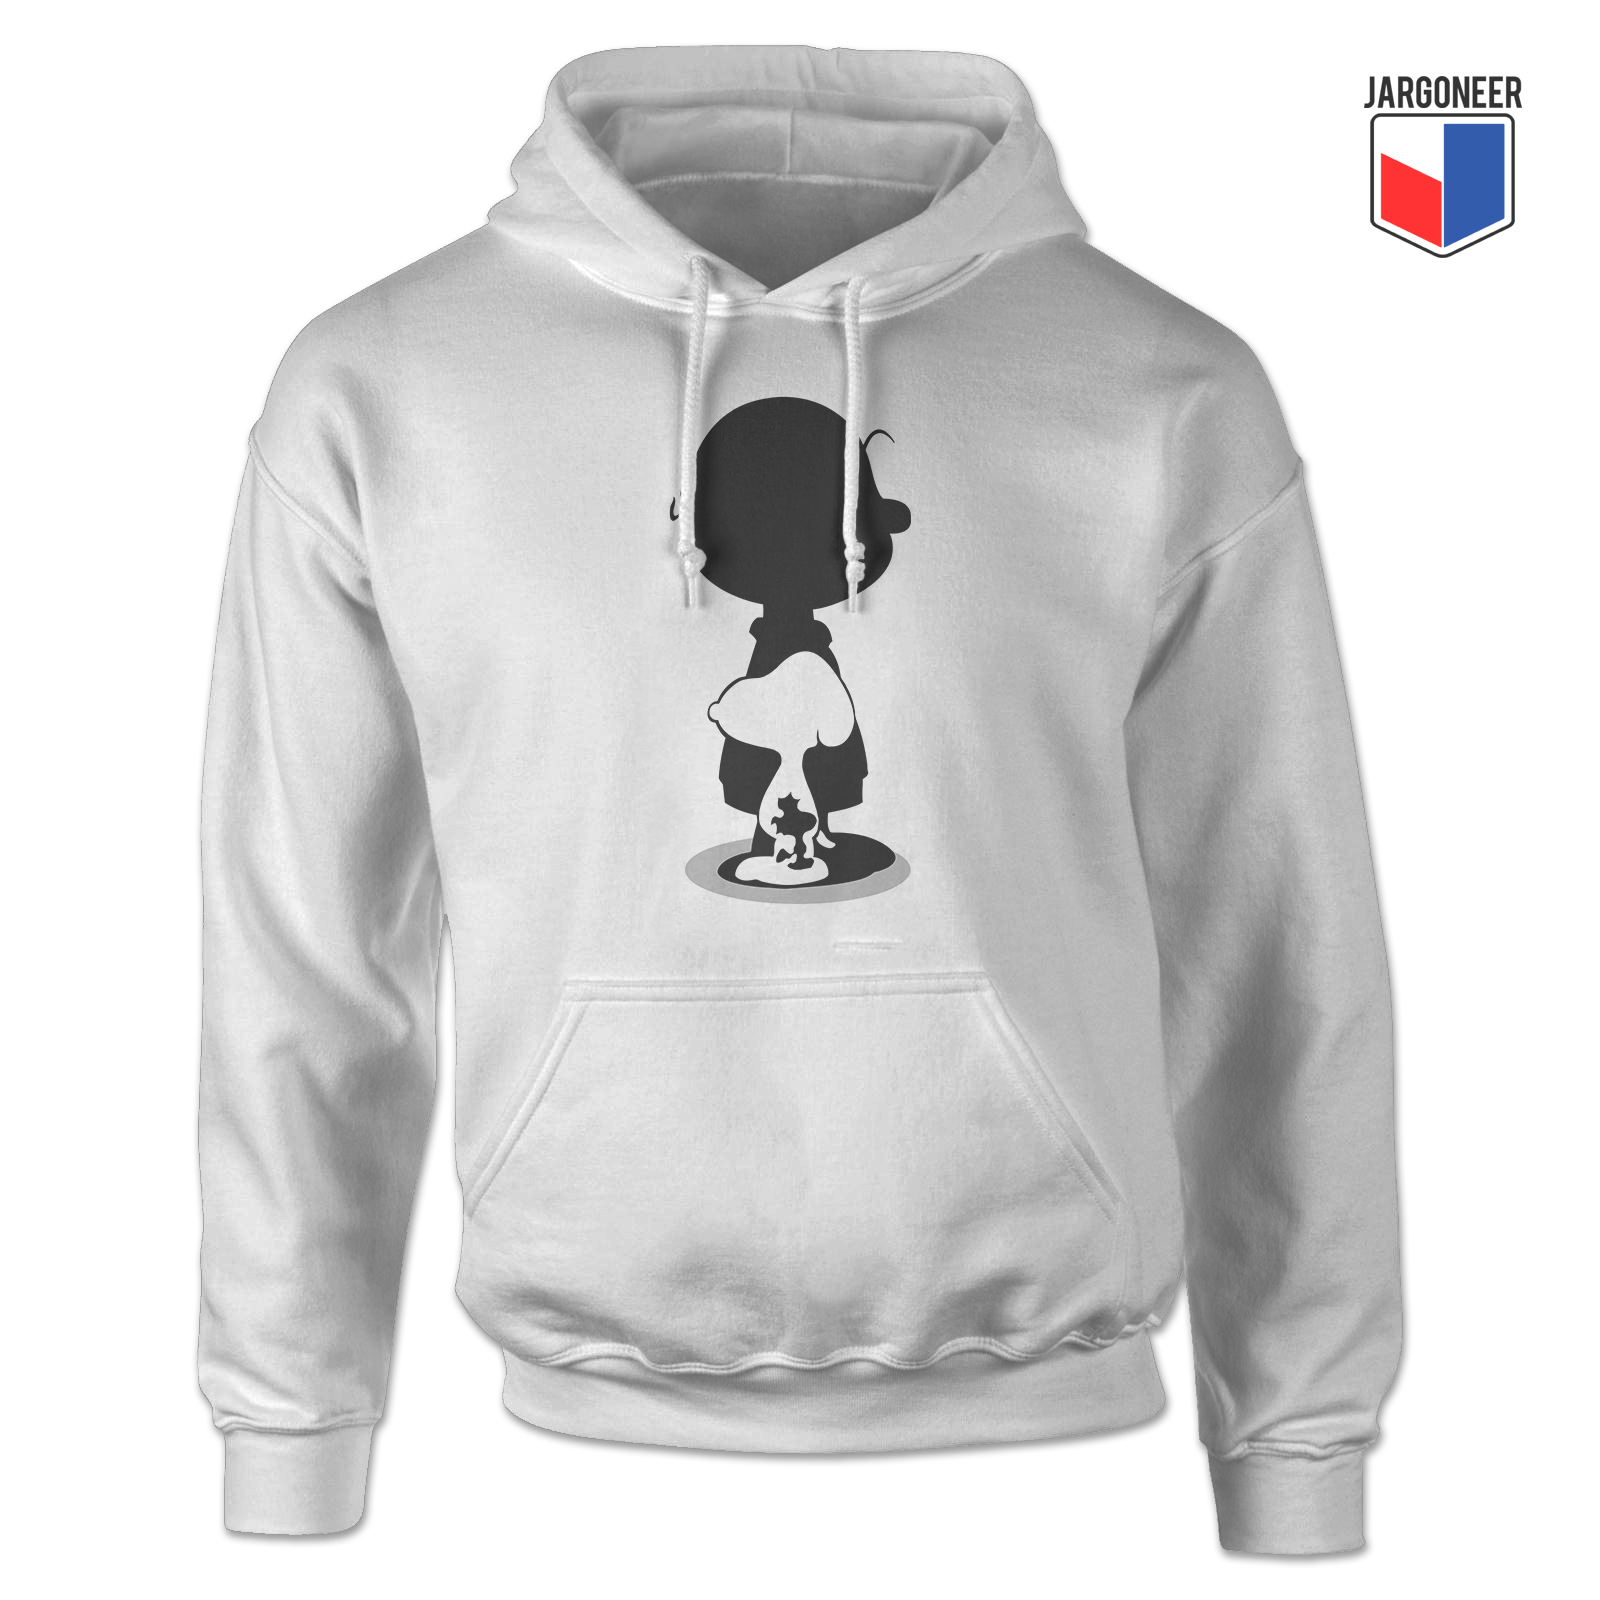 The Peanuts Silhouette White Hoody - Shop Unique Graphic Cool Shirt Designs